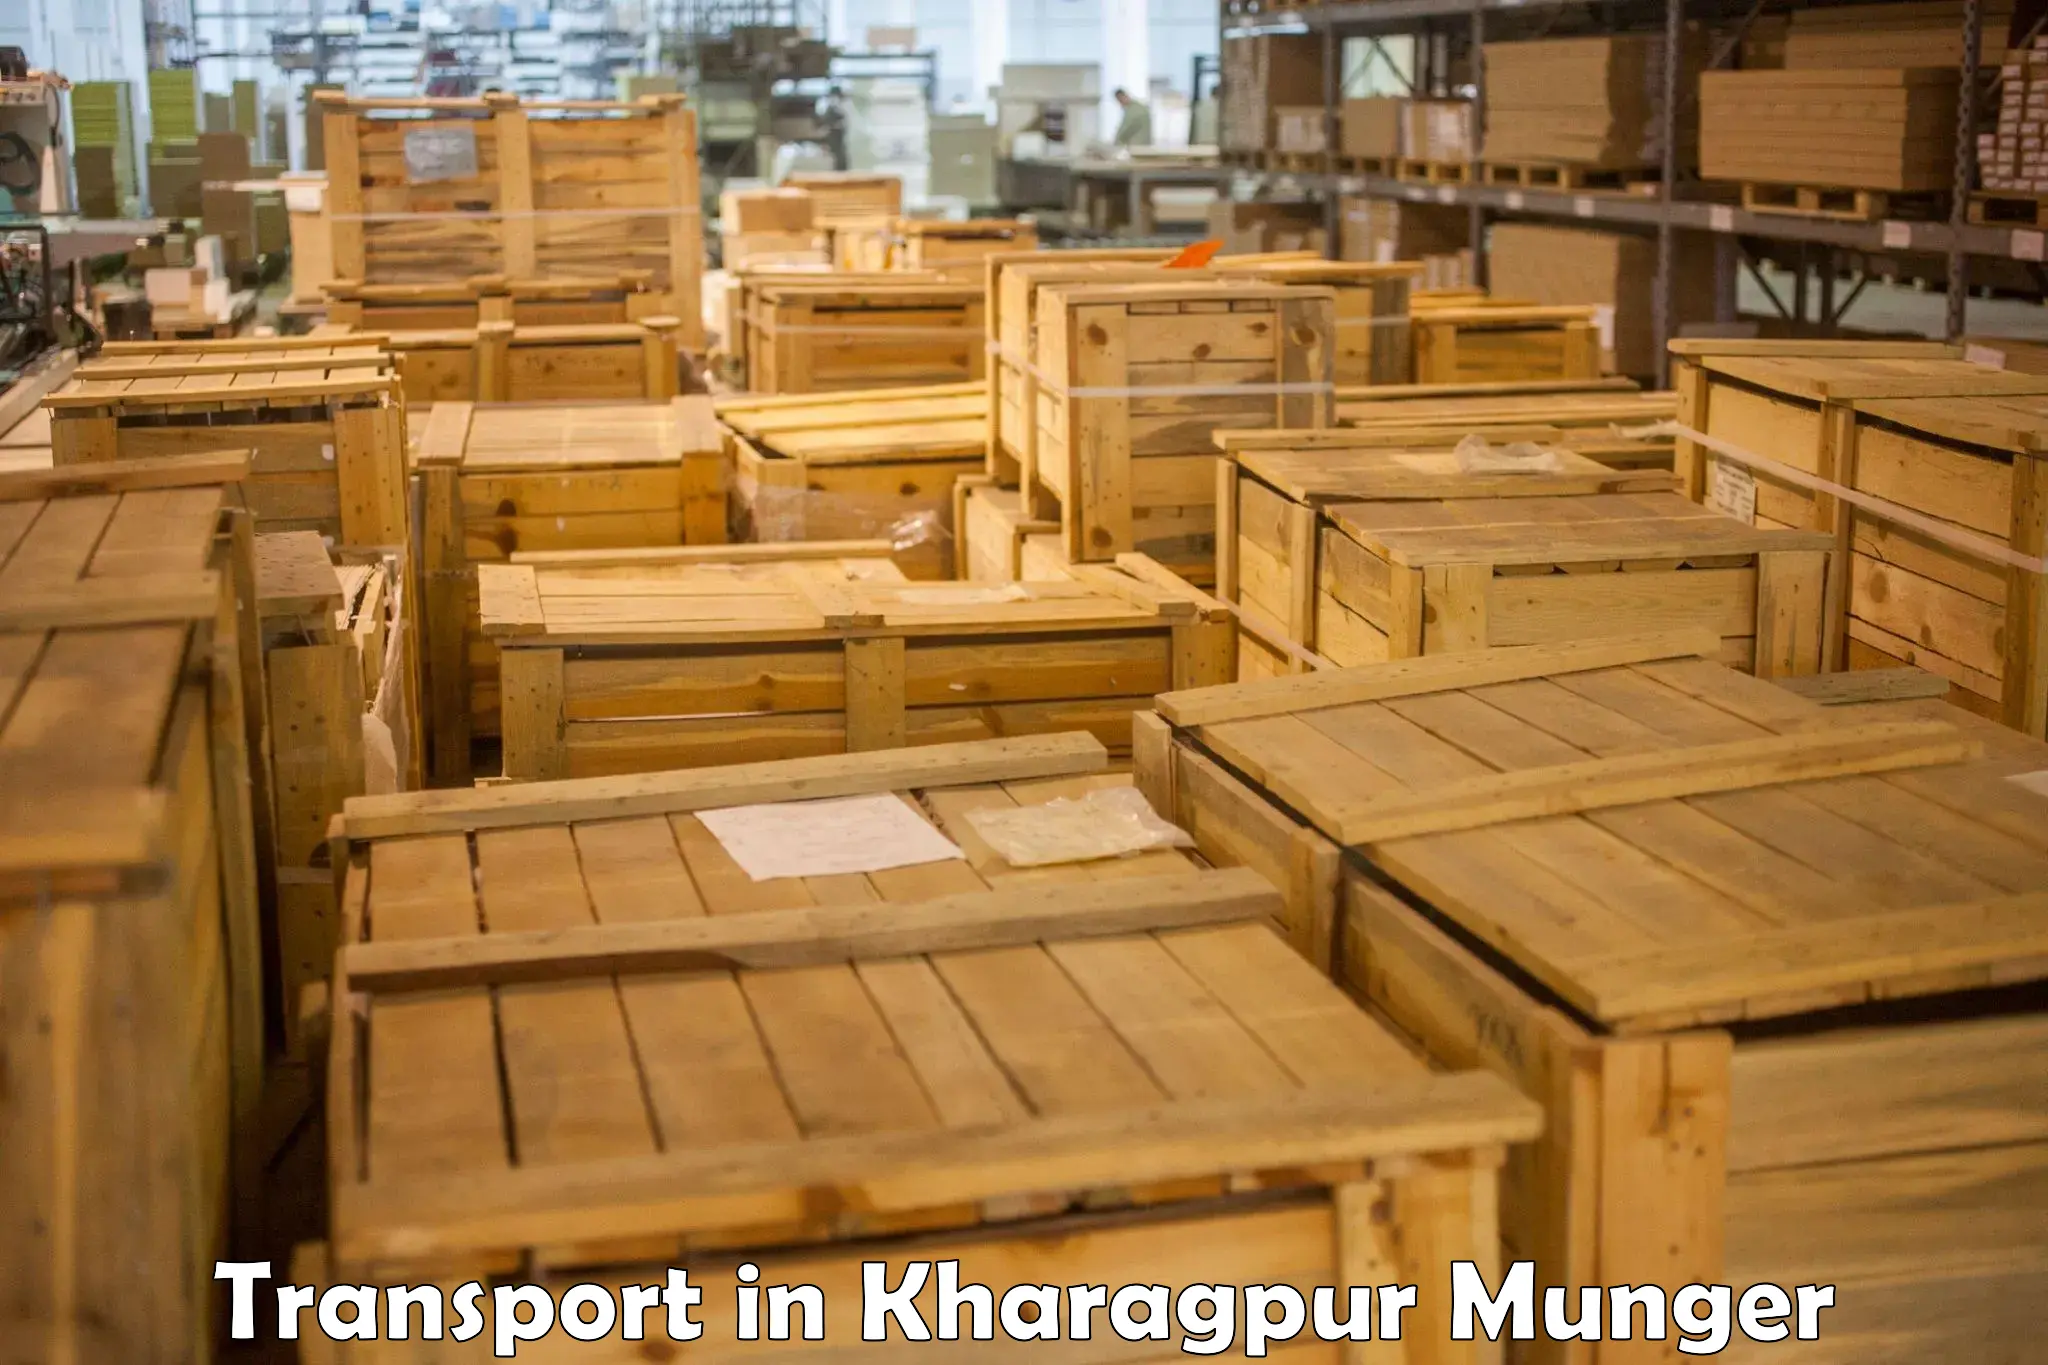 Vehicle transport services in Kharagpur Munger